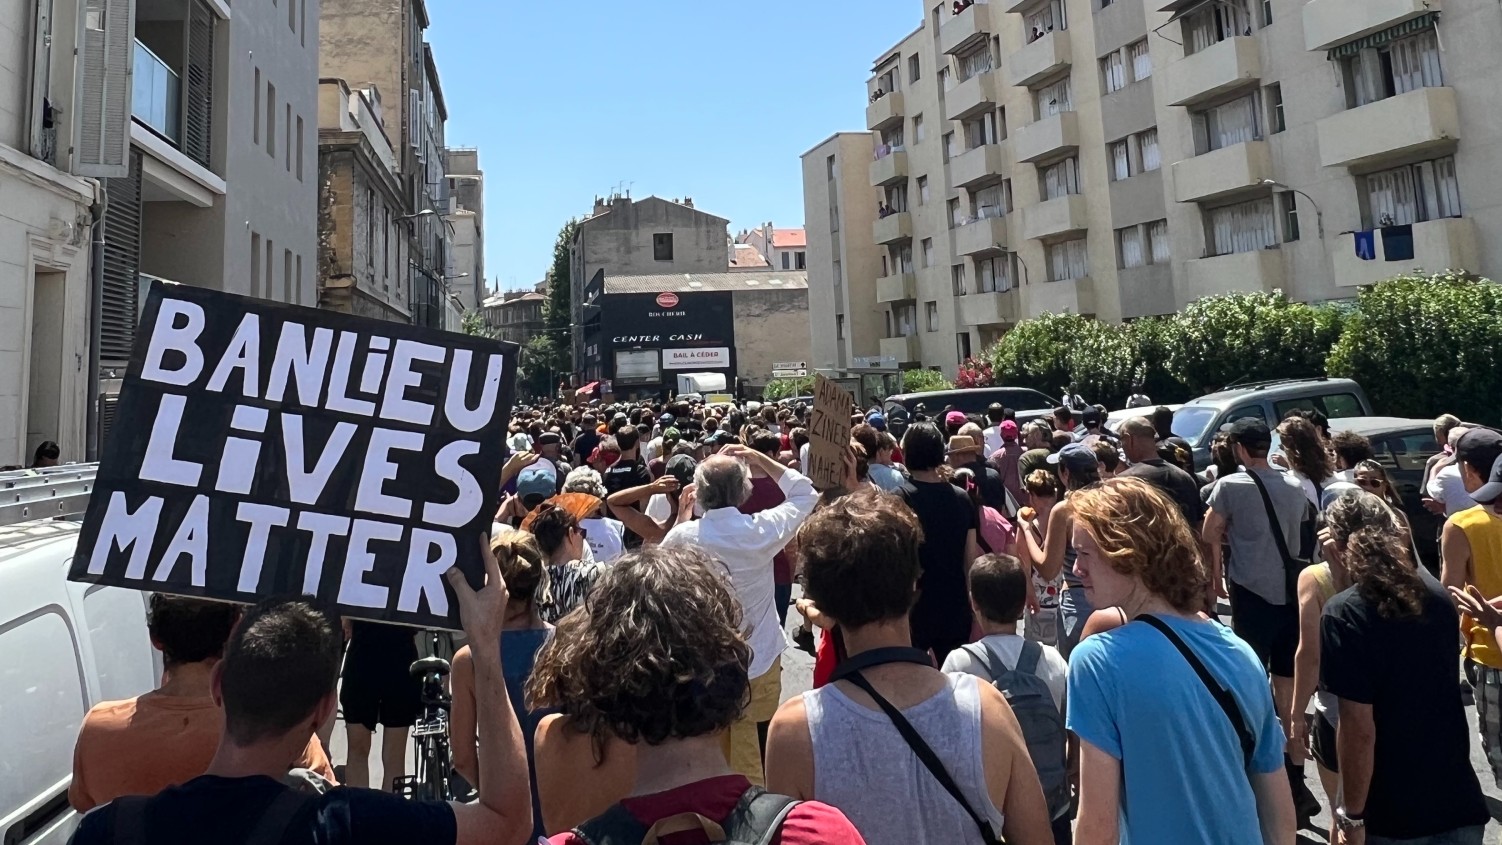 Protesters march in Marseille's Belle de Mai, one of the poorest areas in Europe, to demand justice in the suspected police killing of Mohamed B, on 8 July 2023 (MEE/Frank Andrews)